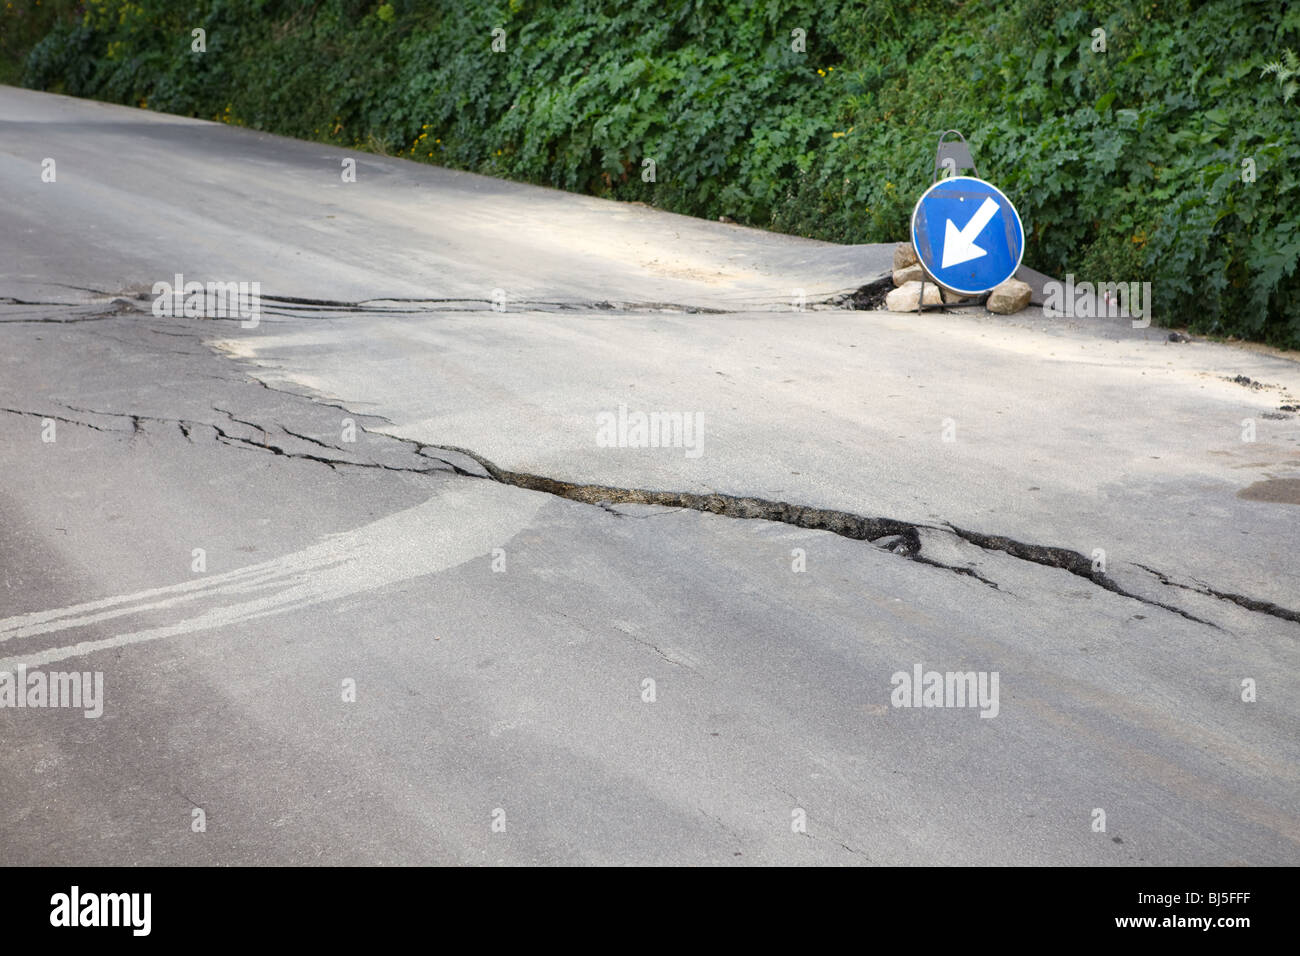 Washed out and damaged road with blue traffic sign pointing direction to attract attention Stock Photo